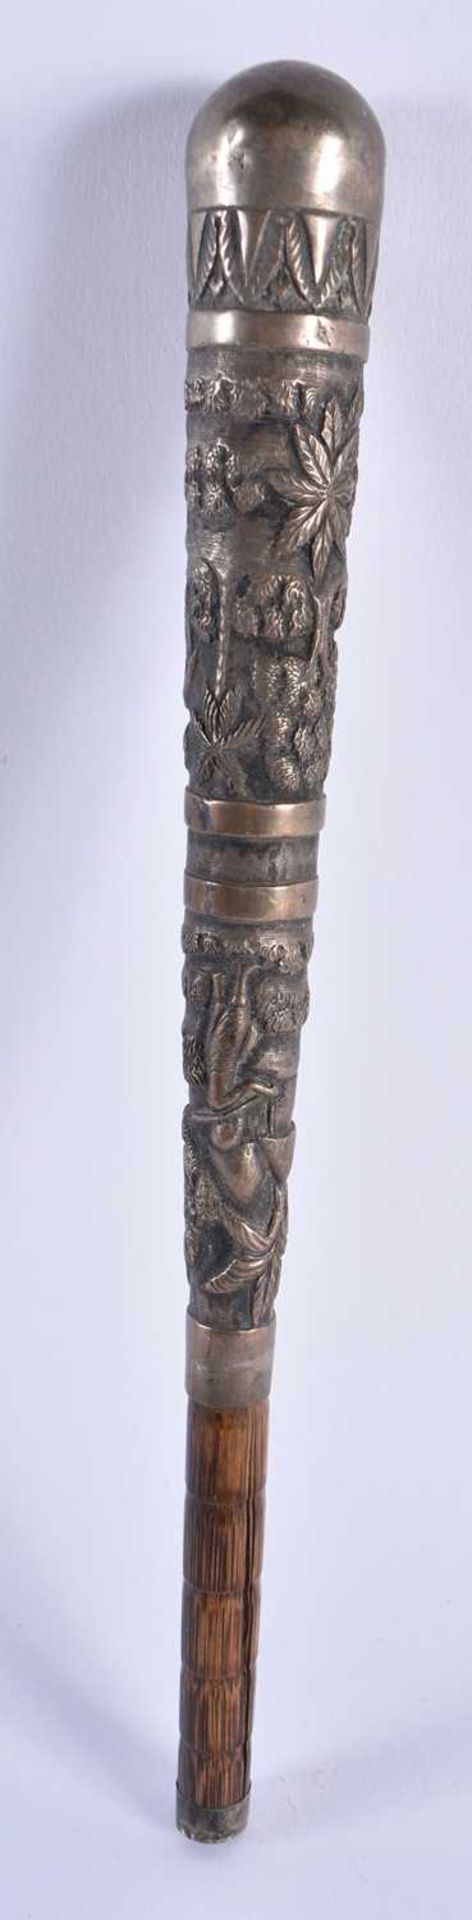 AN ANTIQUE INDIAN SILVER PARASOL HANDLE.107 grams overall. 26.5 cm long. - Image 4 of 6